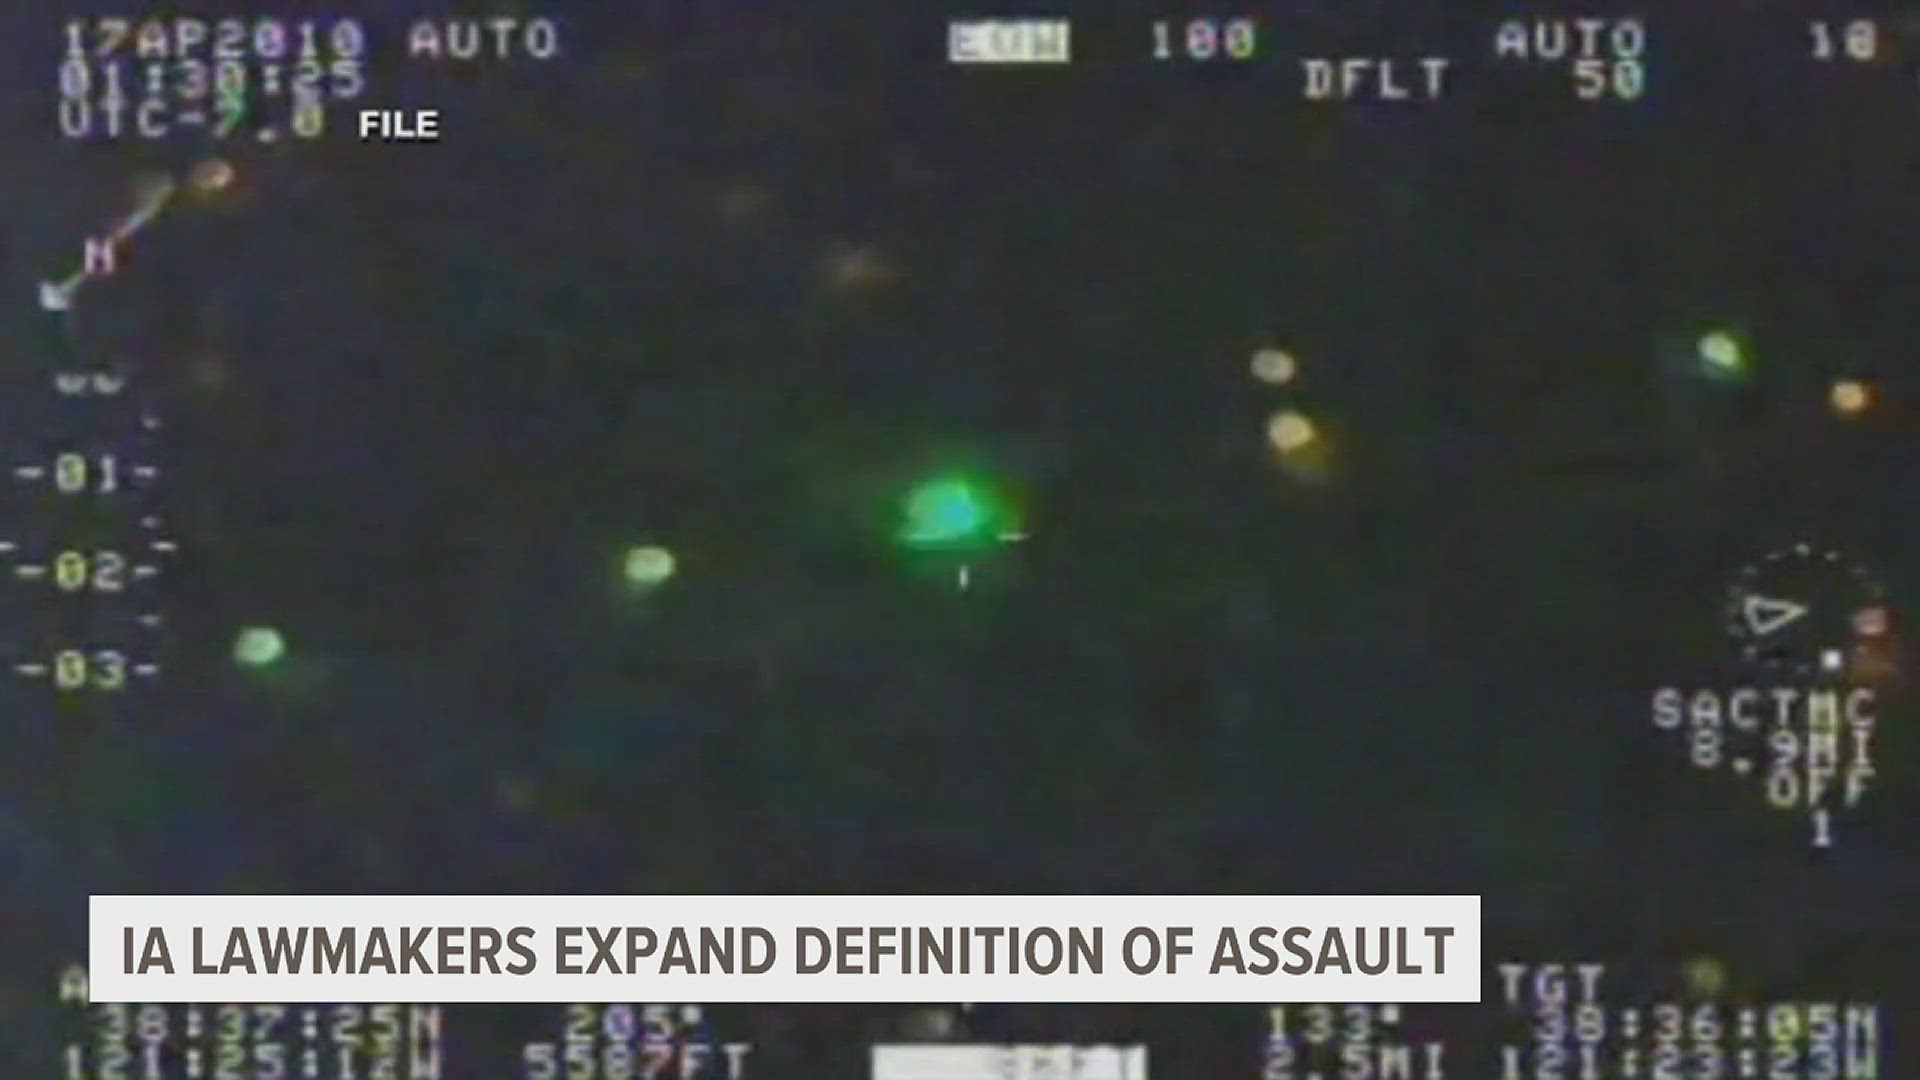 One of the laws would penalize those who point lasers at airplanes, calling it assault in the state. Another would change requirements for hotel inspections.